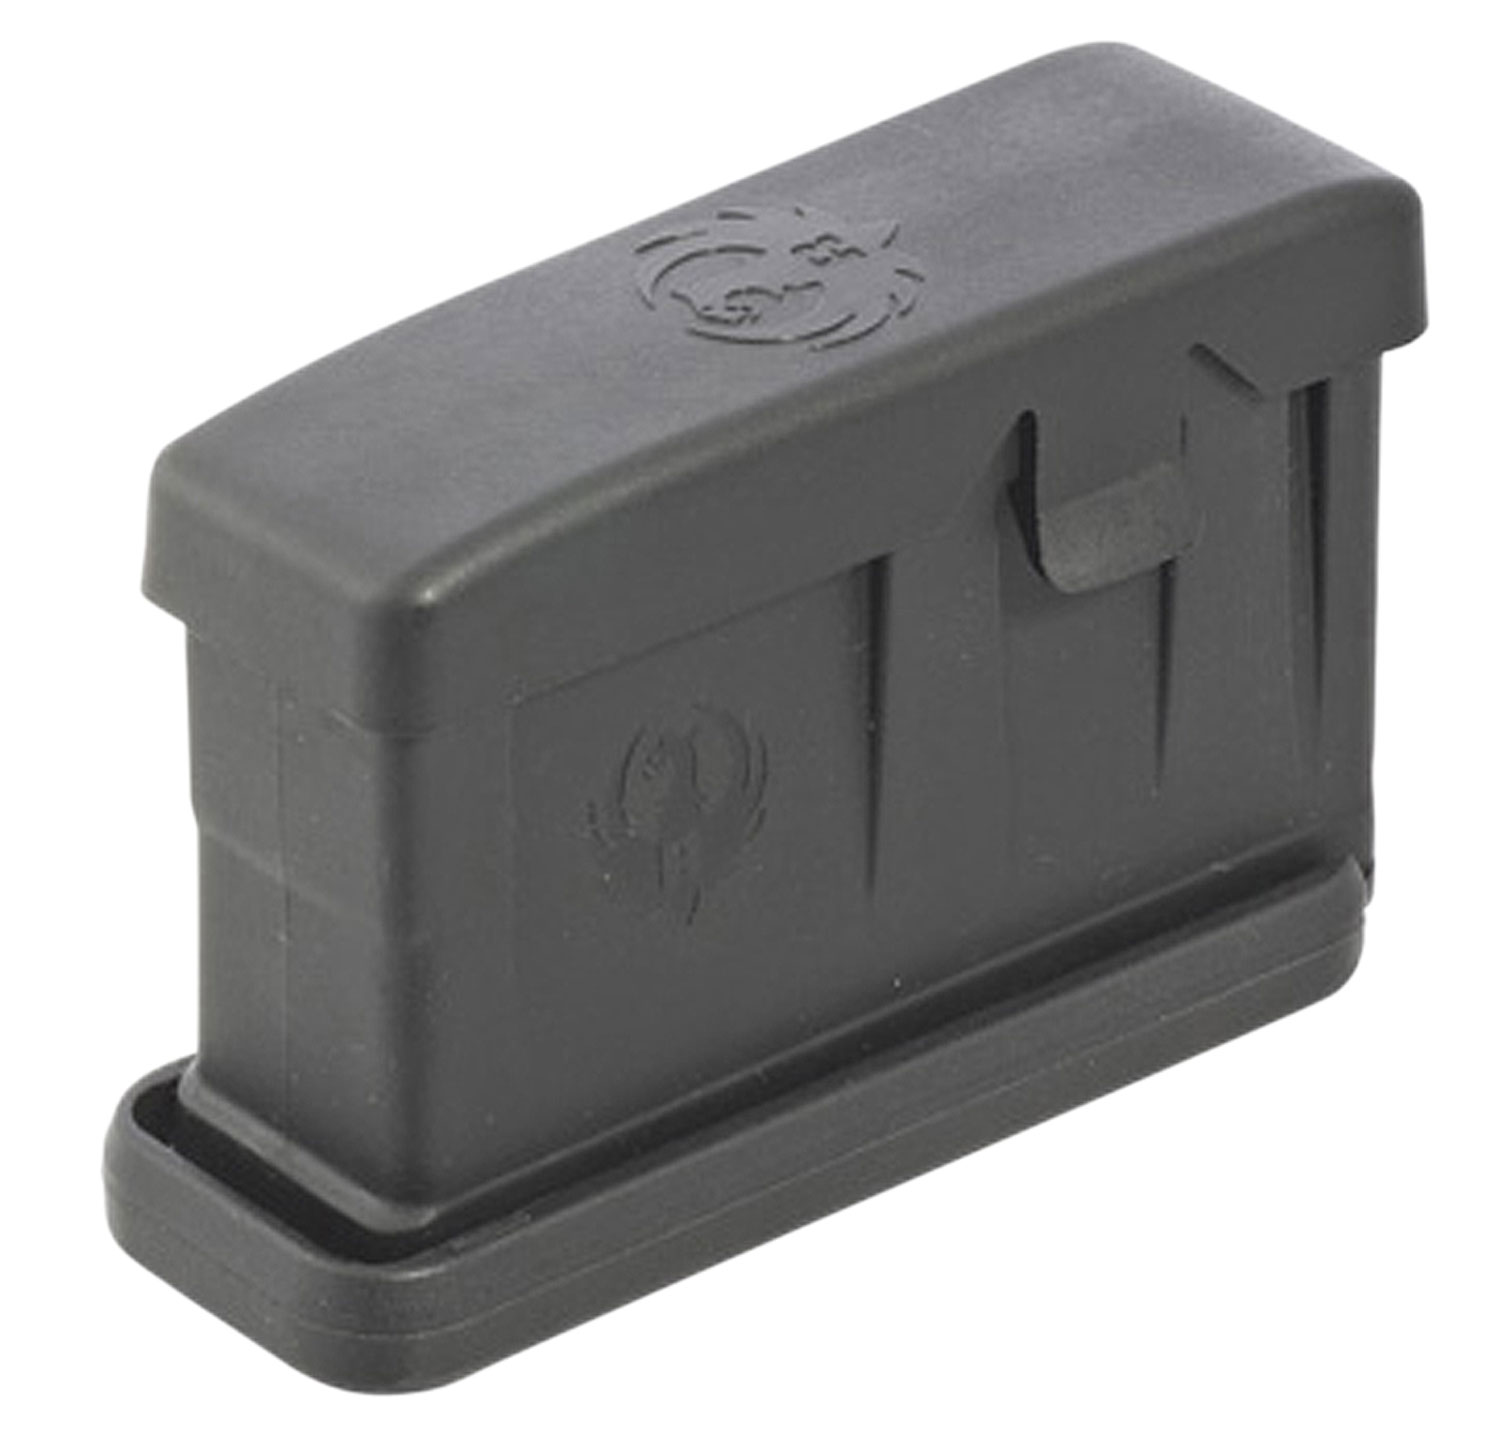 RUGER AI-STYLE MAGAZINE 3RD 308 WIN POLYMER